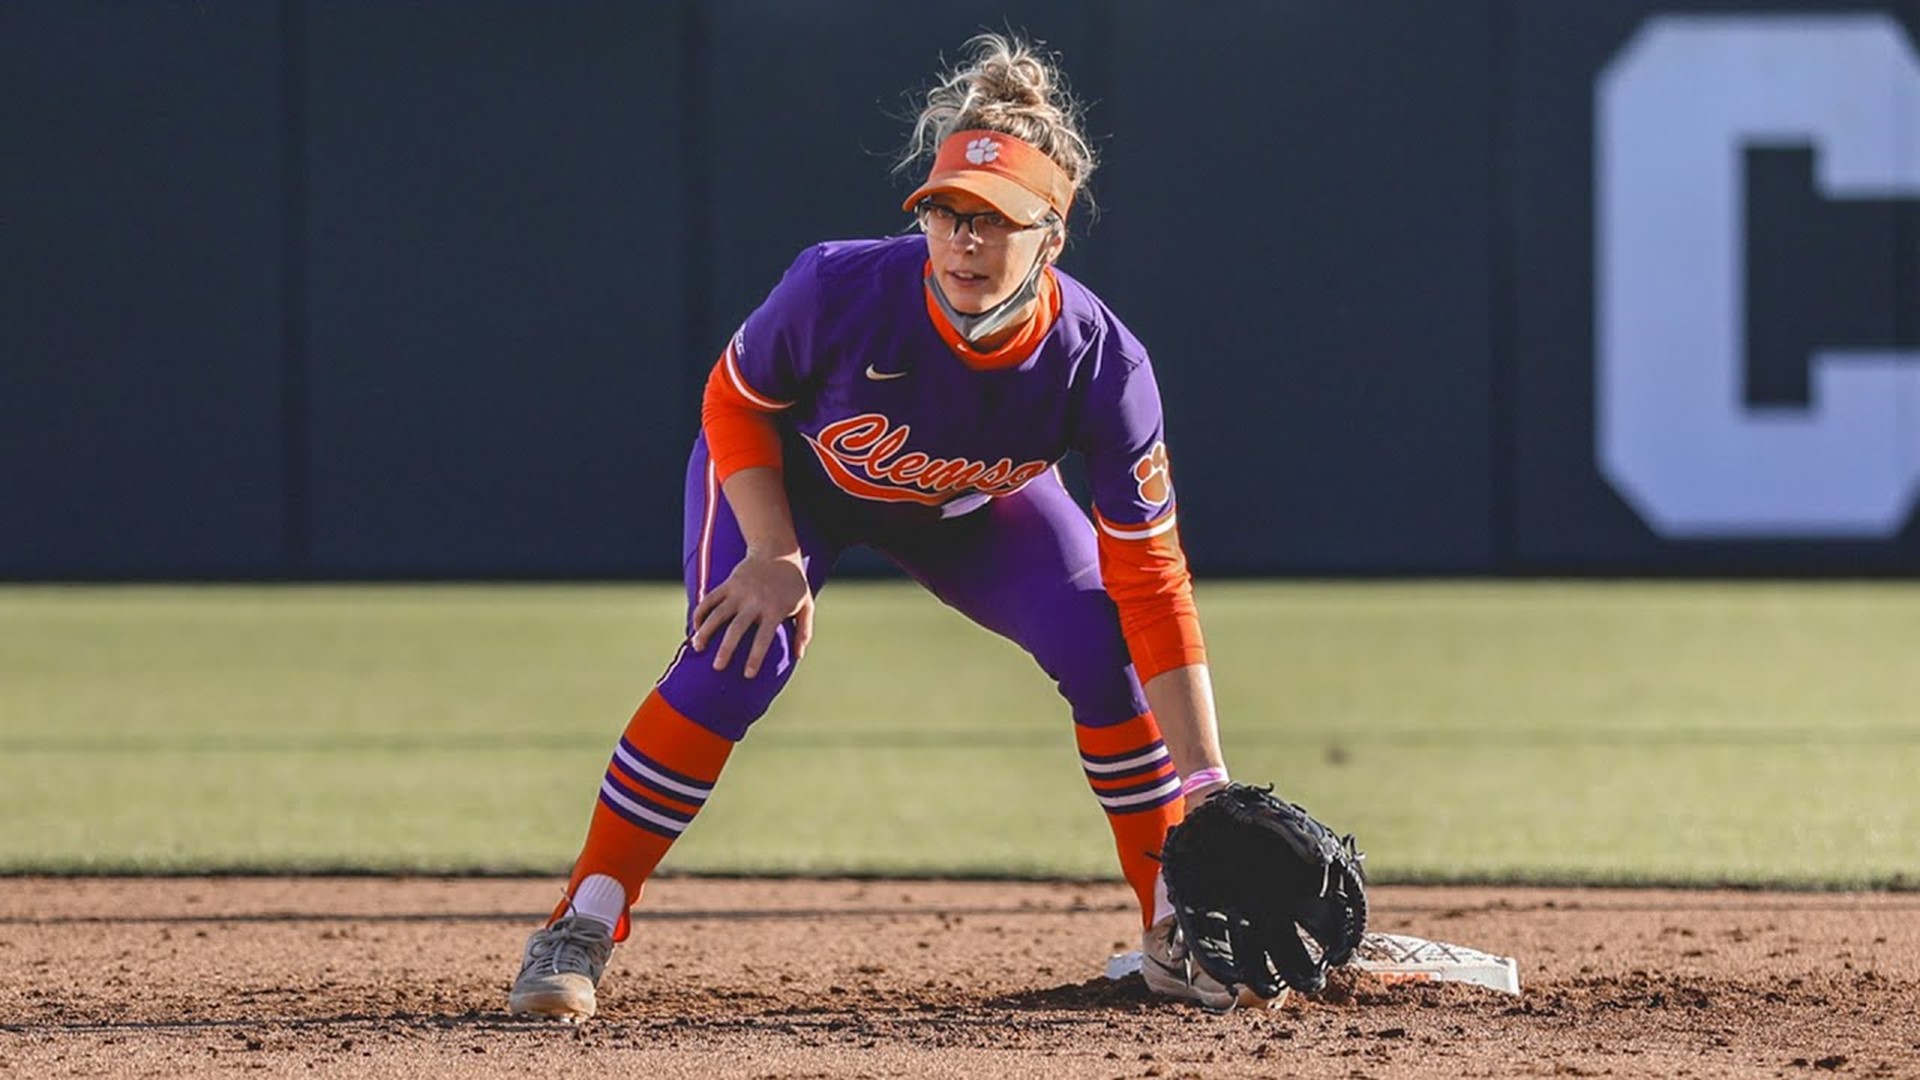 After missing Clemson's inaugural season in 2020, the Blythewood Grad is back and is excited about making her return to the Capital City on Wednesday.